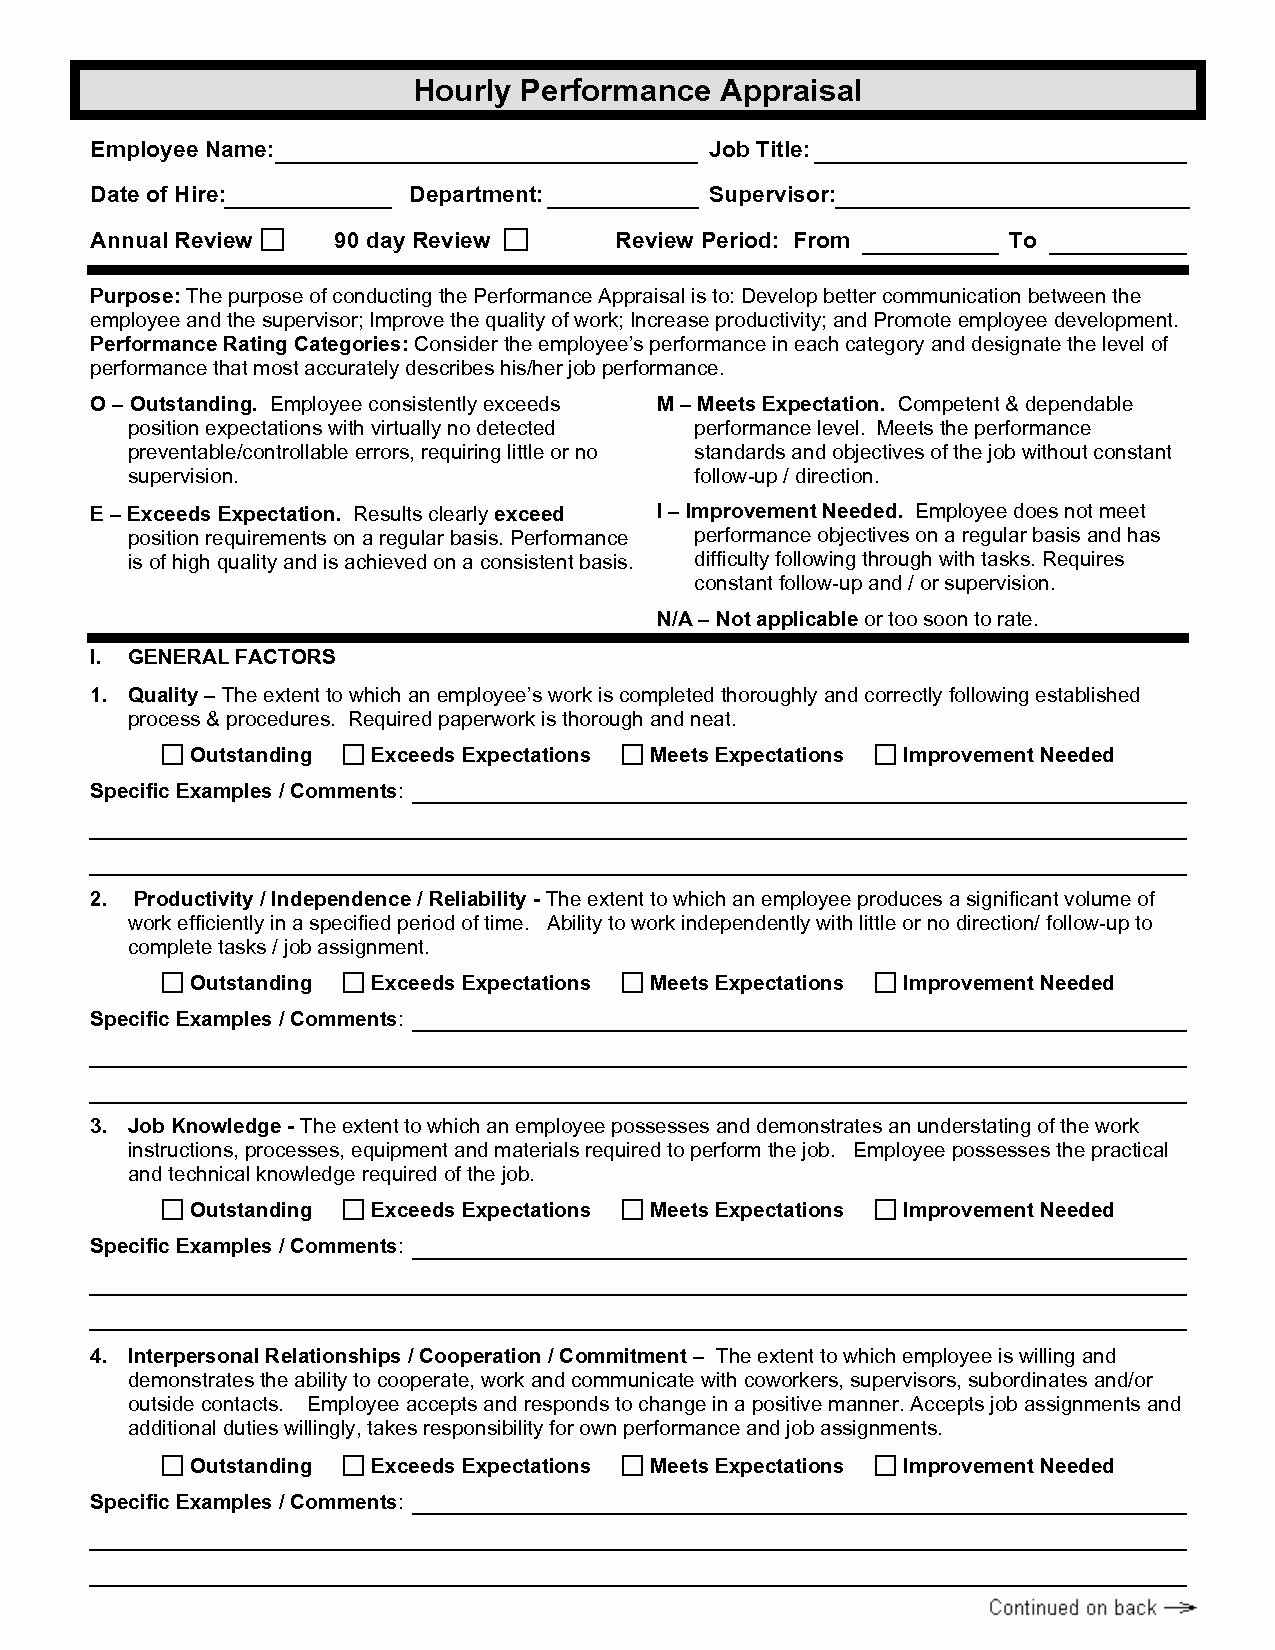 Free Employee Evaluation form Template Luxury Employee Performance Evaluation form Free Download